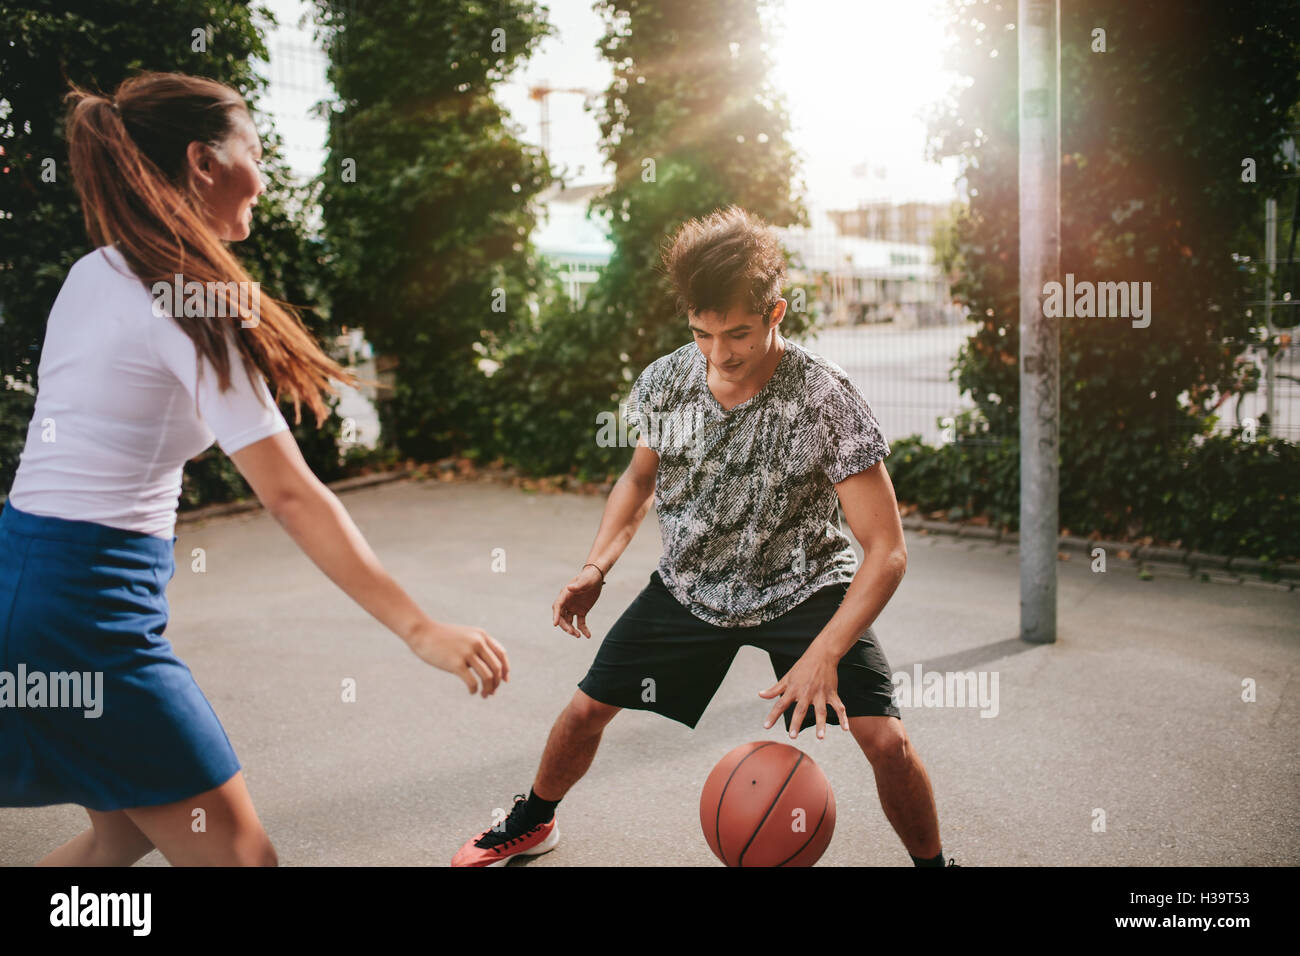 Two young man and woman on basketball court dribbling with ball. Friends playing basketball on court and having fun. Stock Photo